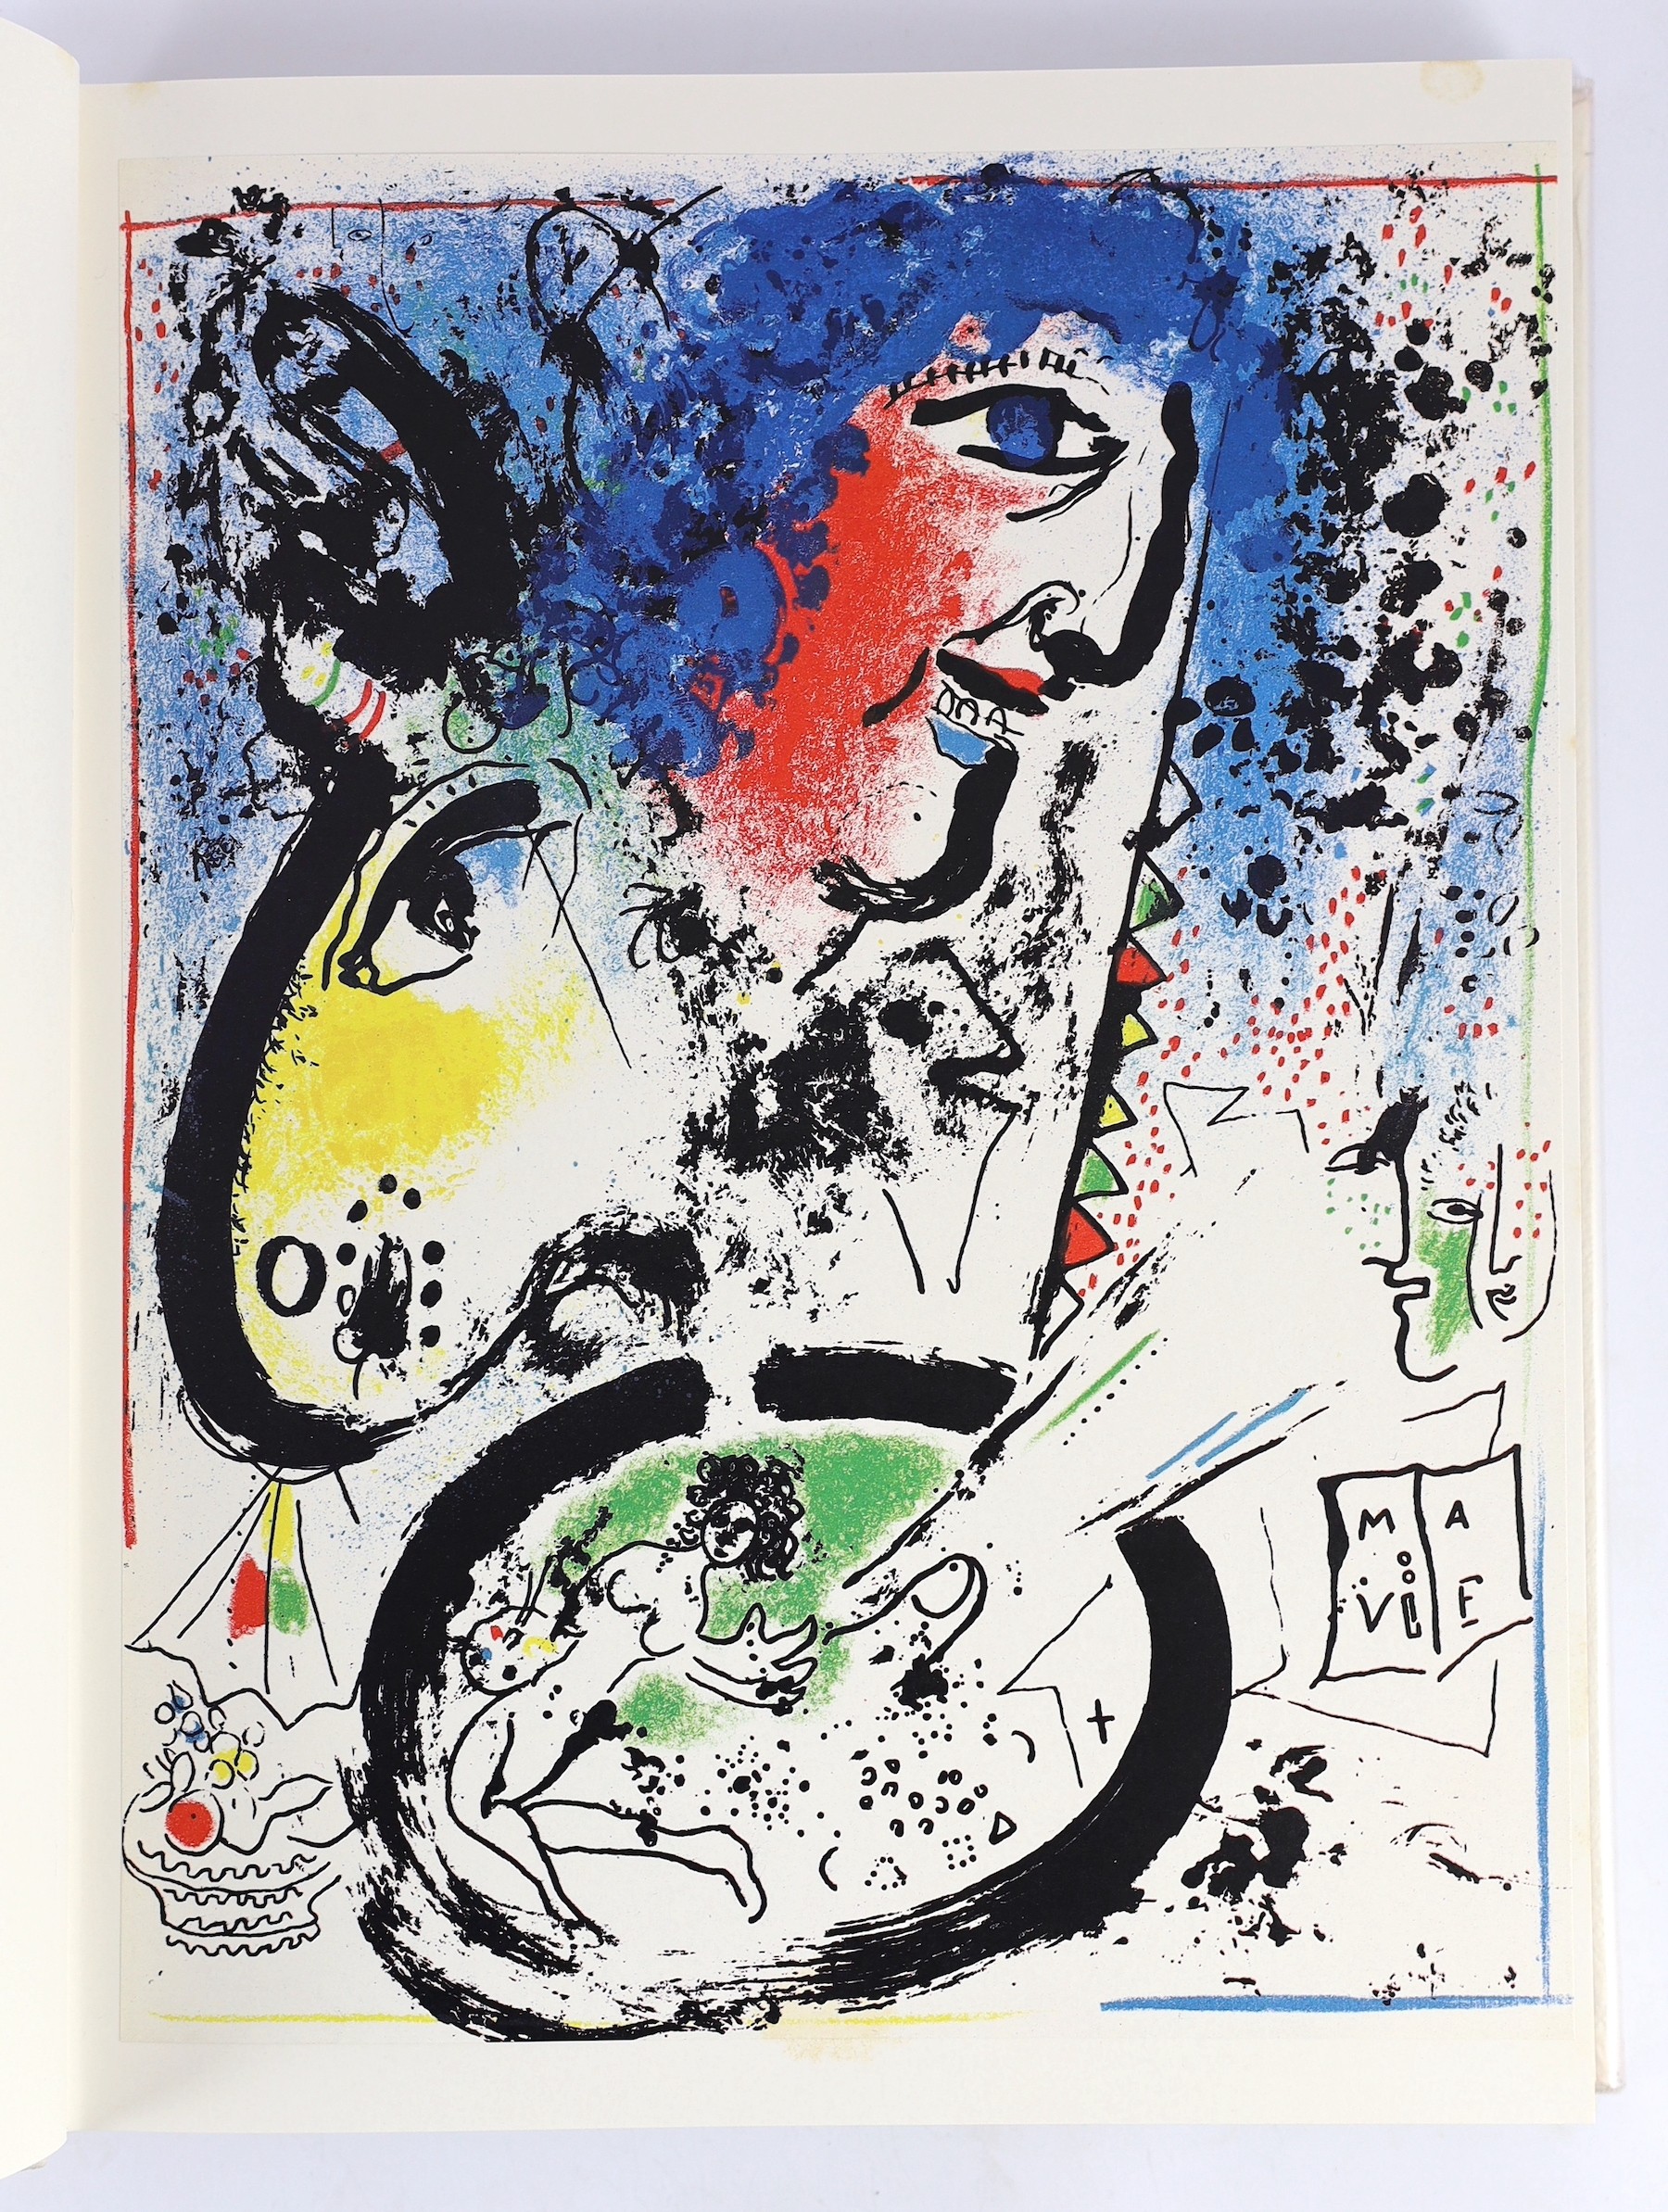 Chagall, Marc - Chagall Lithographie, [catalogue raisonne], 5 vols, number 326 of 1000, folio, white pebble-grained faux leather, Japanese edition, text in Japanese and French, Publishers 2000 Inc, Tokyo, 1978, in slip c